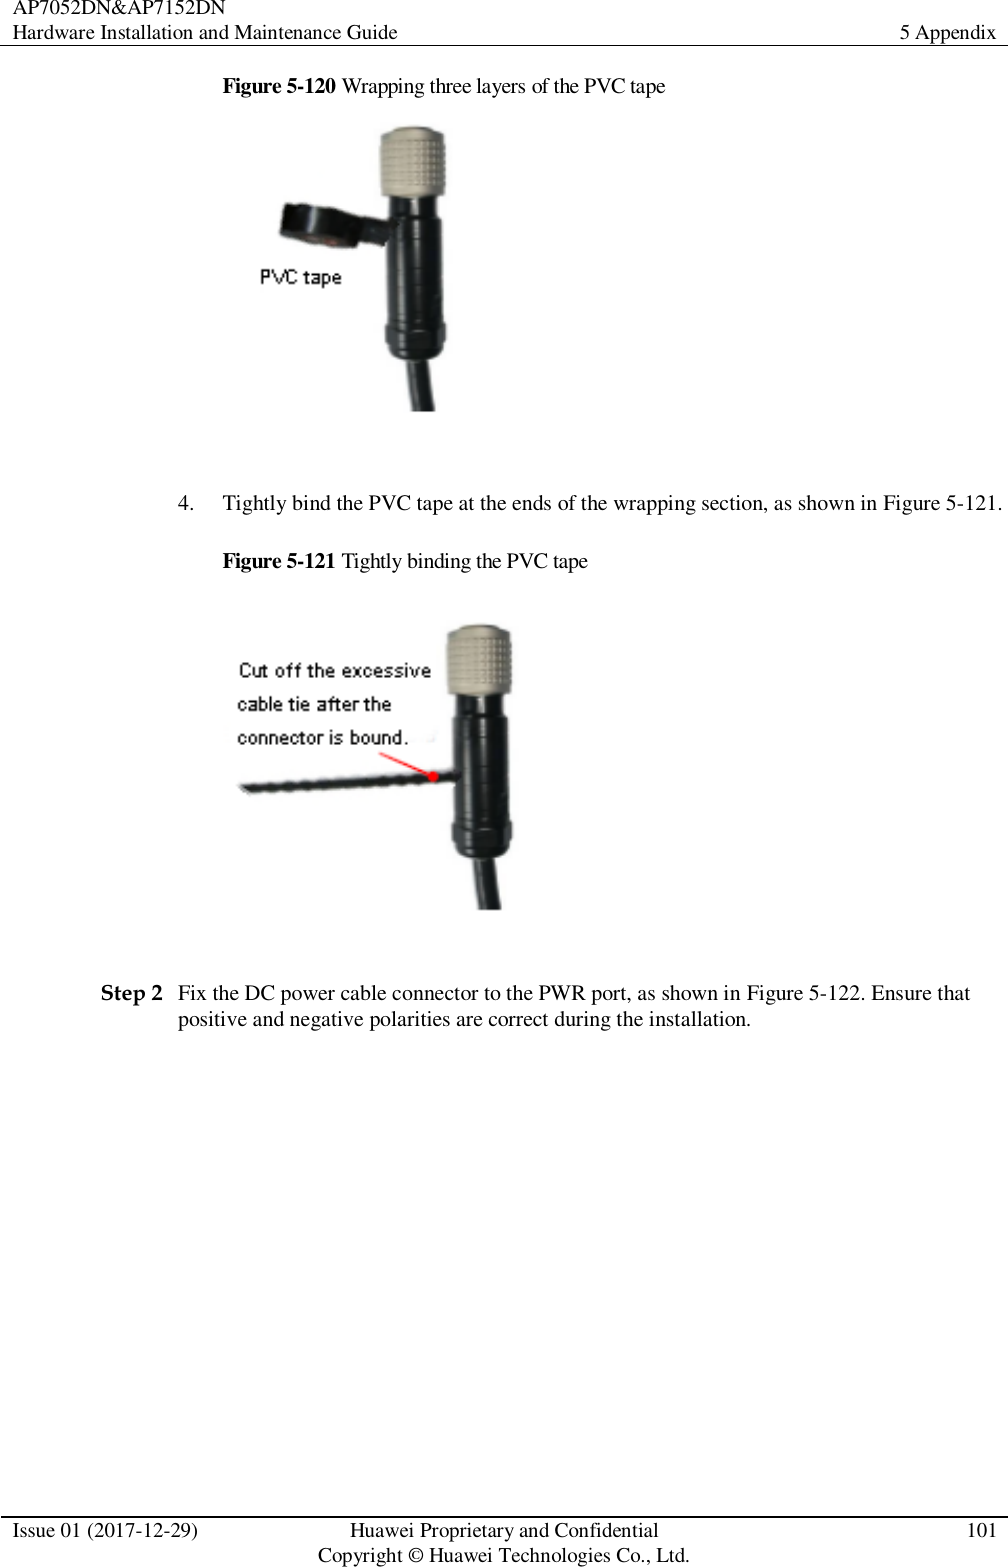 AP7052DN&amp;AP7152DN Hardware Installation and Maintenance Guide 5 Appendix  Issue 01 (2017-12-29) Huawei Proprietary and Confidential                                     Copyright © Huawei Technologies Co., Ltd. 101  Figure 5-120 Wrapping three layers of the PVC tape   4. Tightly bind the PVC tape at the ends of the wrapping section, as shown in Figure 5-121. Figure 5-121 Tightly binding the PVC tape   Step 2 Fix the DC power cable connector to the PWR port, as shown in Figure 5-122. Ensure that positive and negative polarities are correct during the installation.   